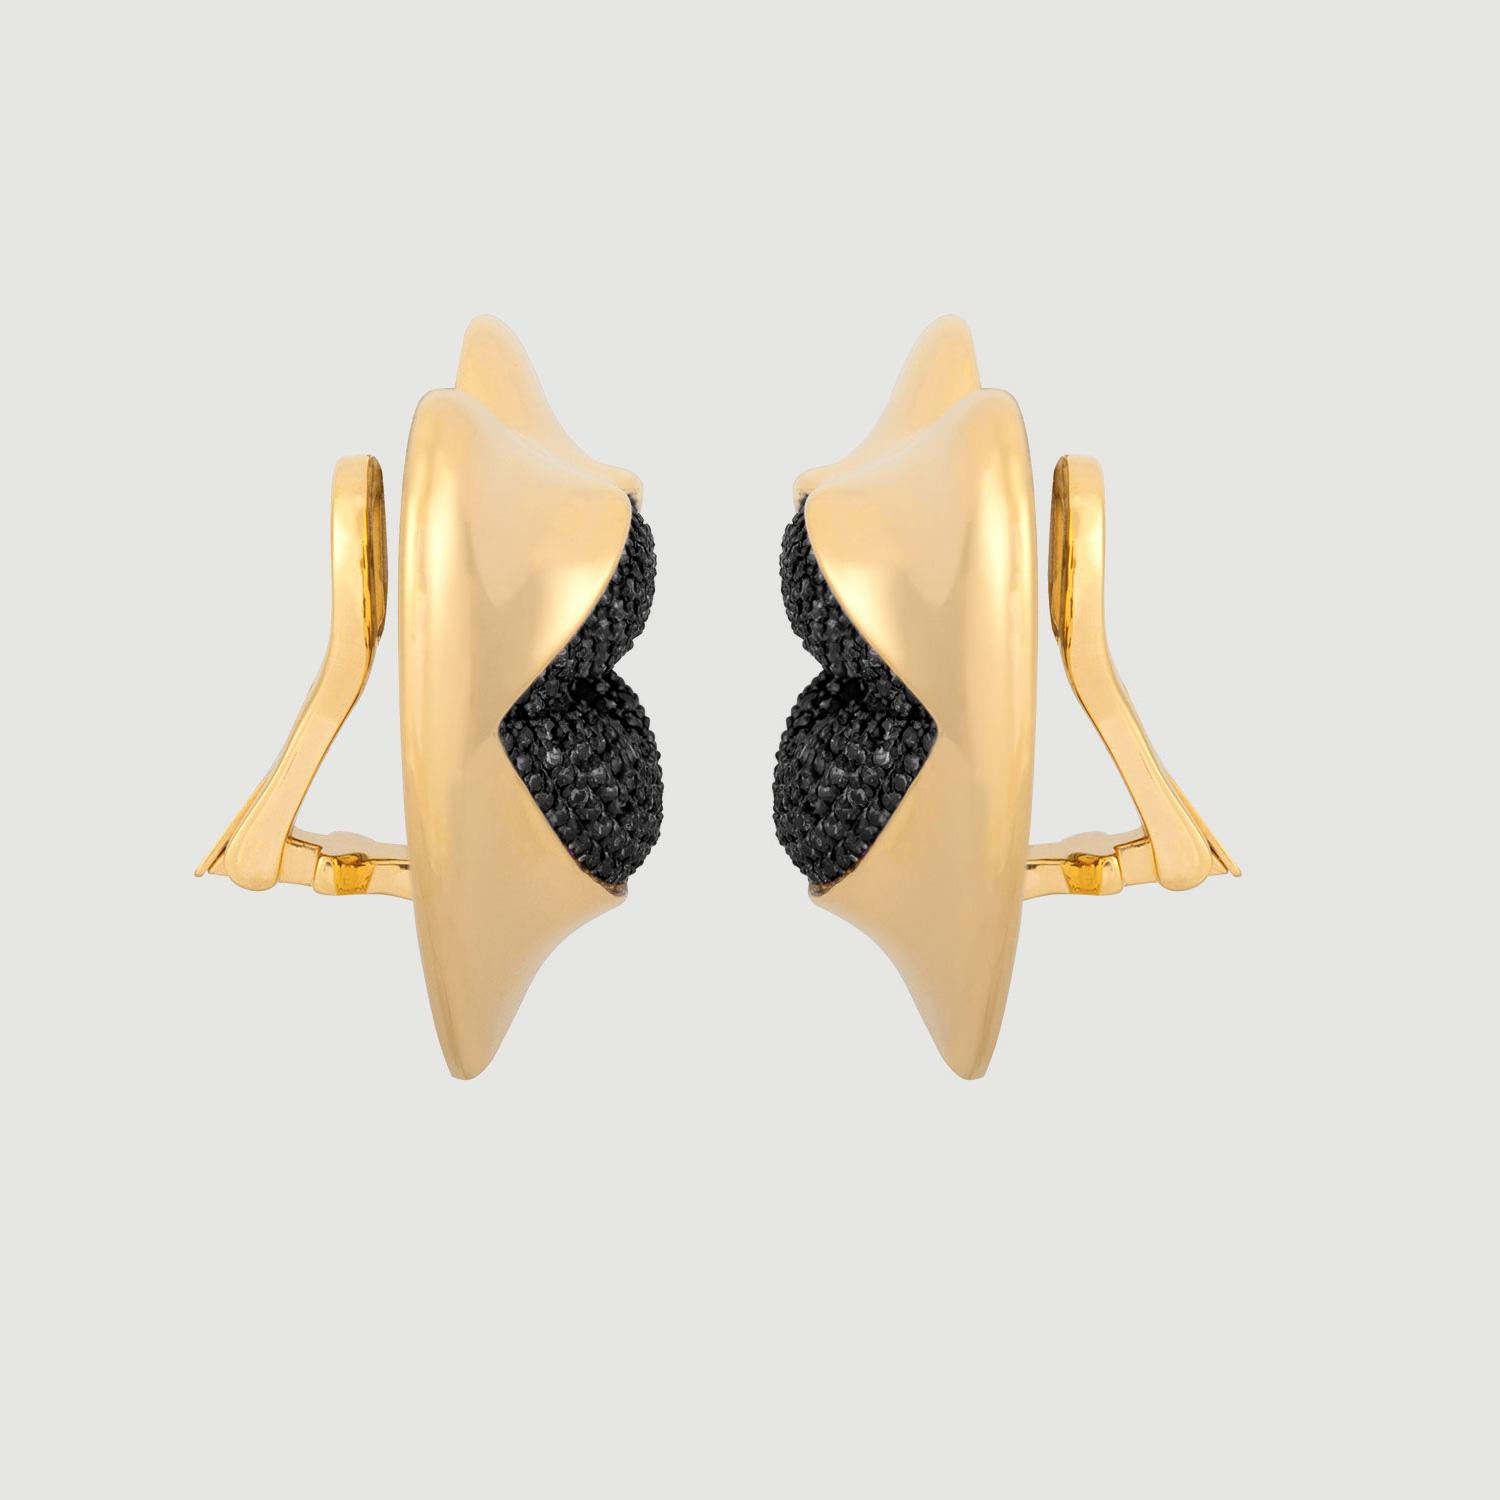 Love starts with the heart and lasts on the lips. These might be the sexiest earrings ever! Our sexy gold statement heart earrings with black diamond kisses. Shine your love on!

Composition: Sterling Silver, 18k gold vermeil and Rhodium